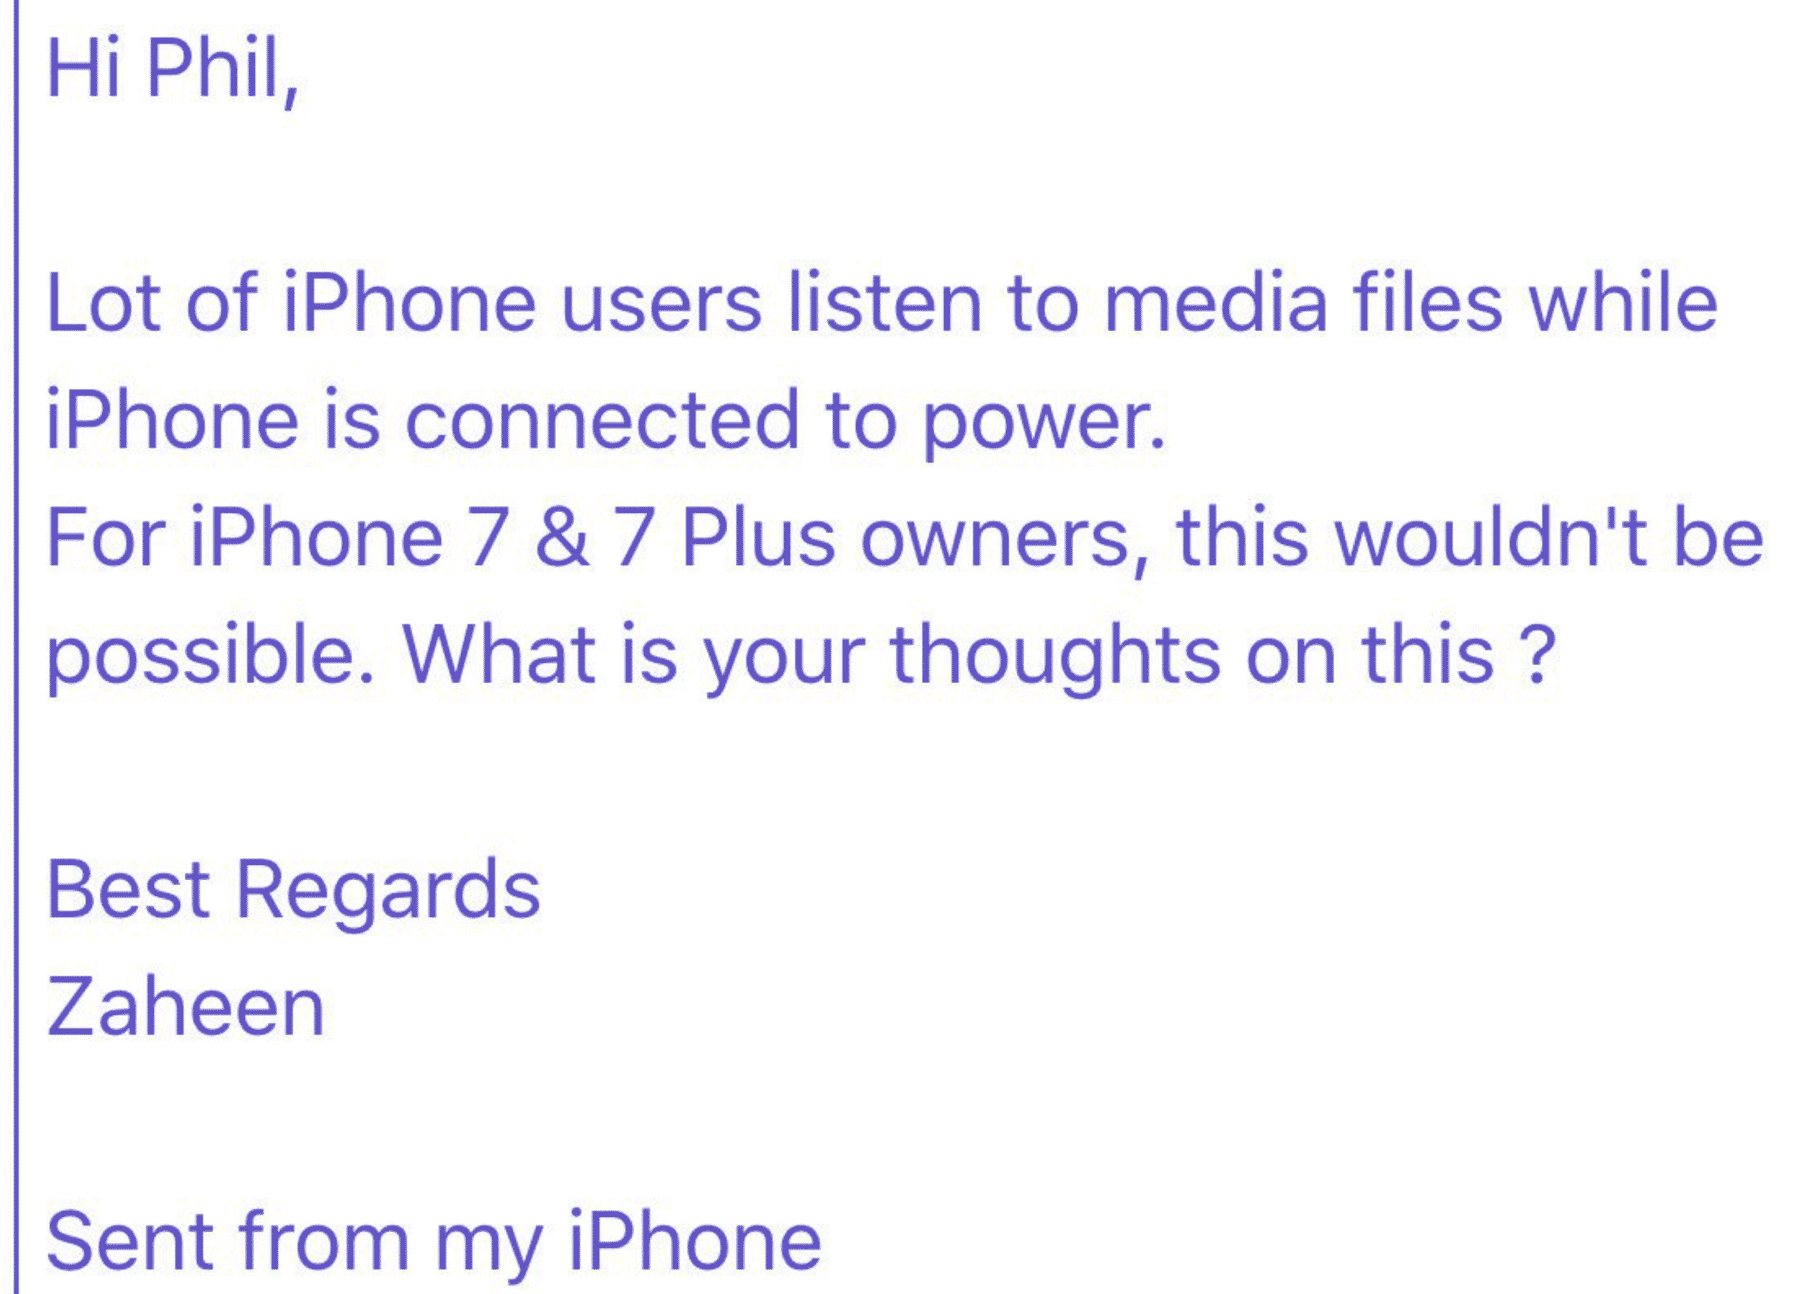 Email a Phil Schiller